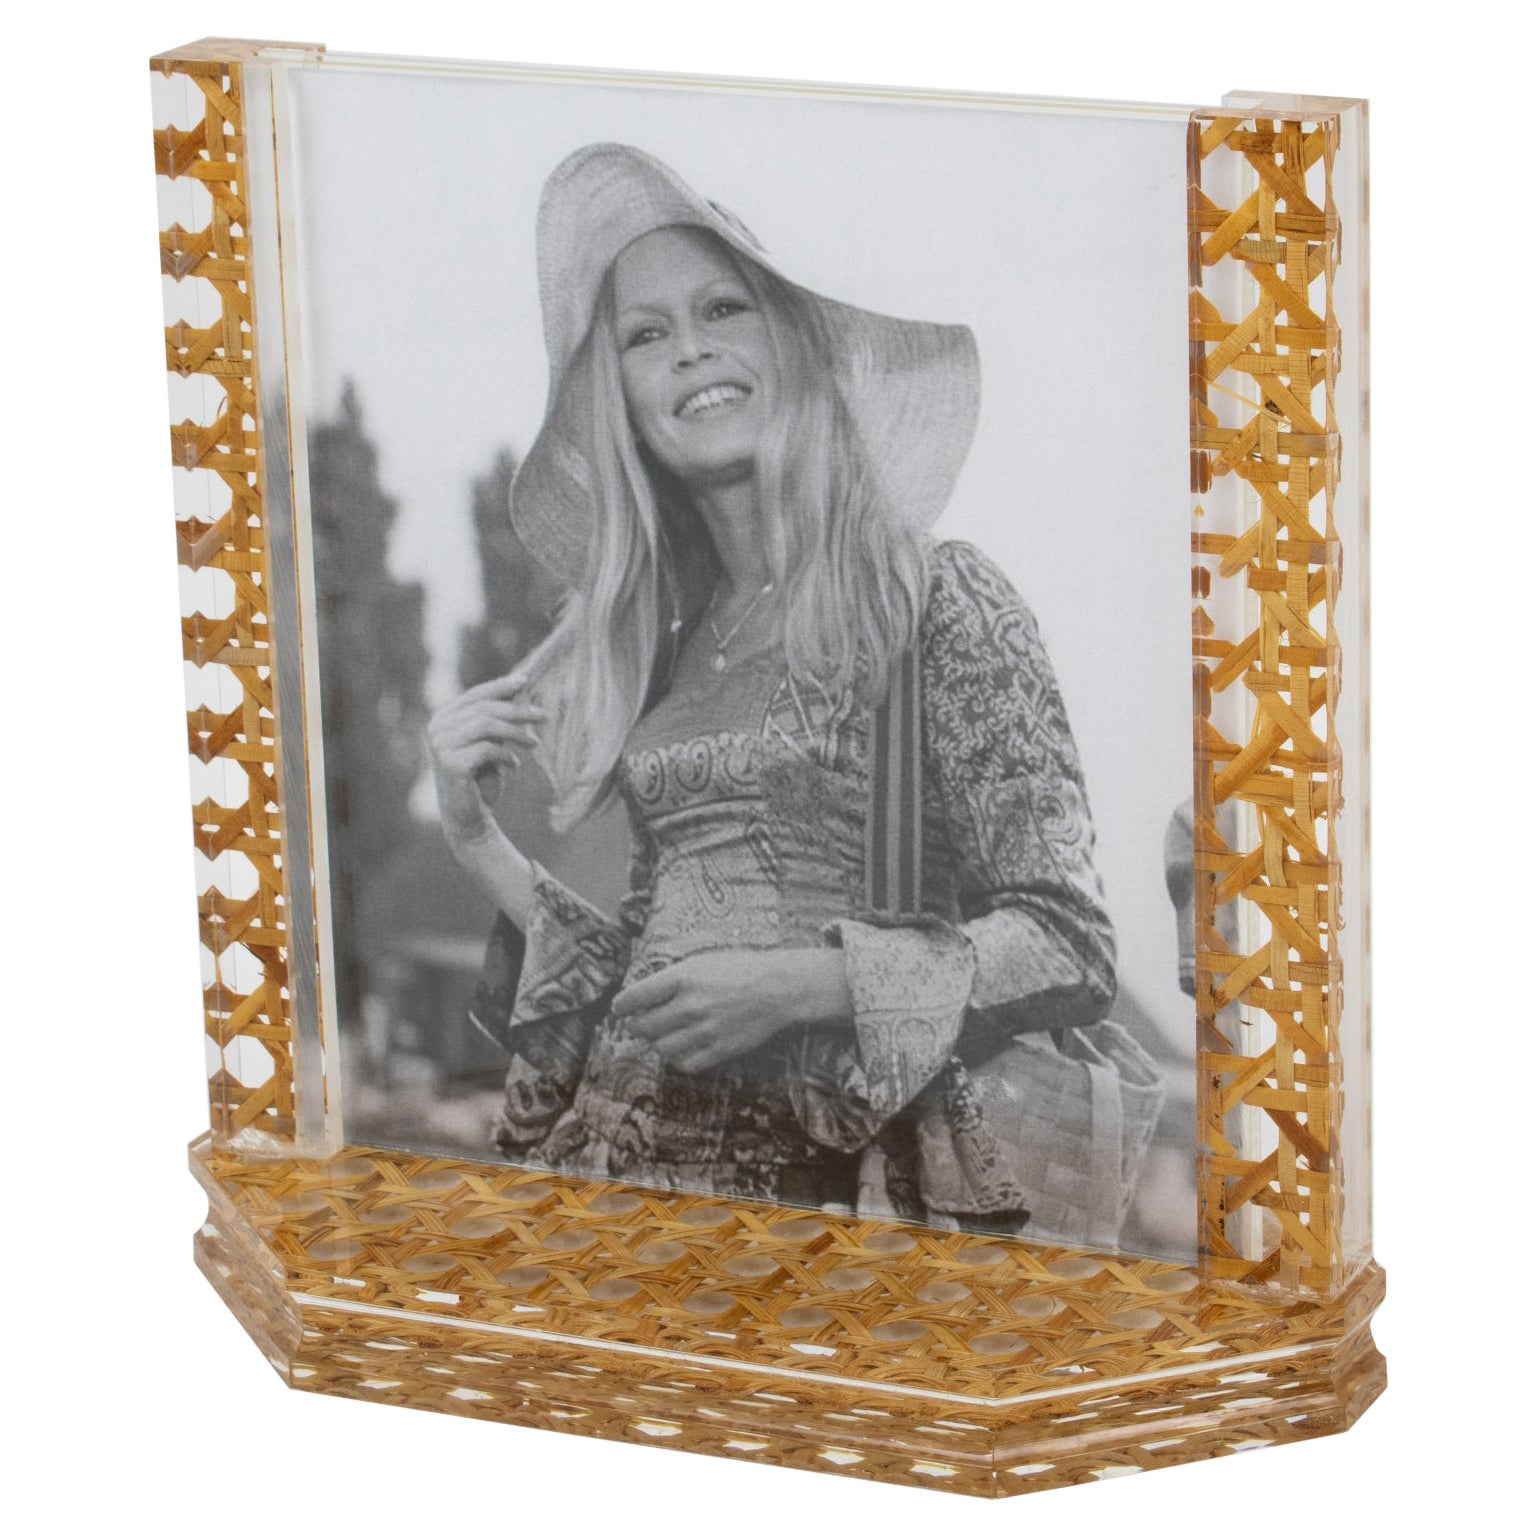 Lucite, Rattan, Wicker Picture Frame, Italy 1970s